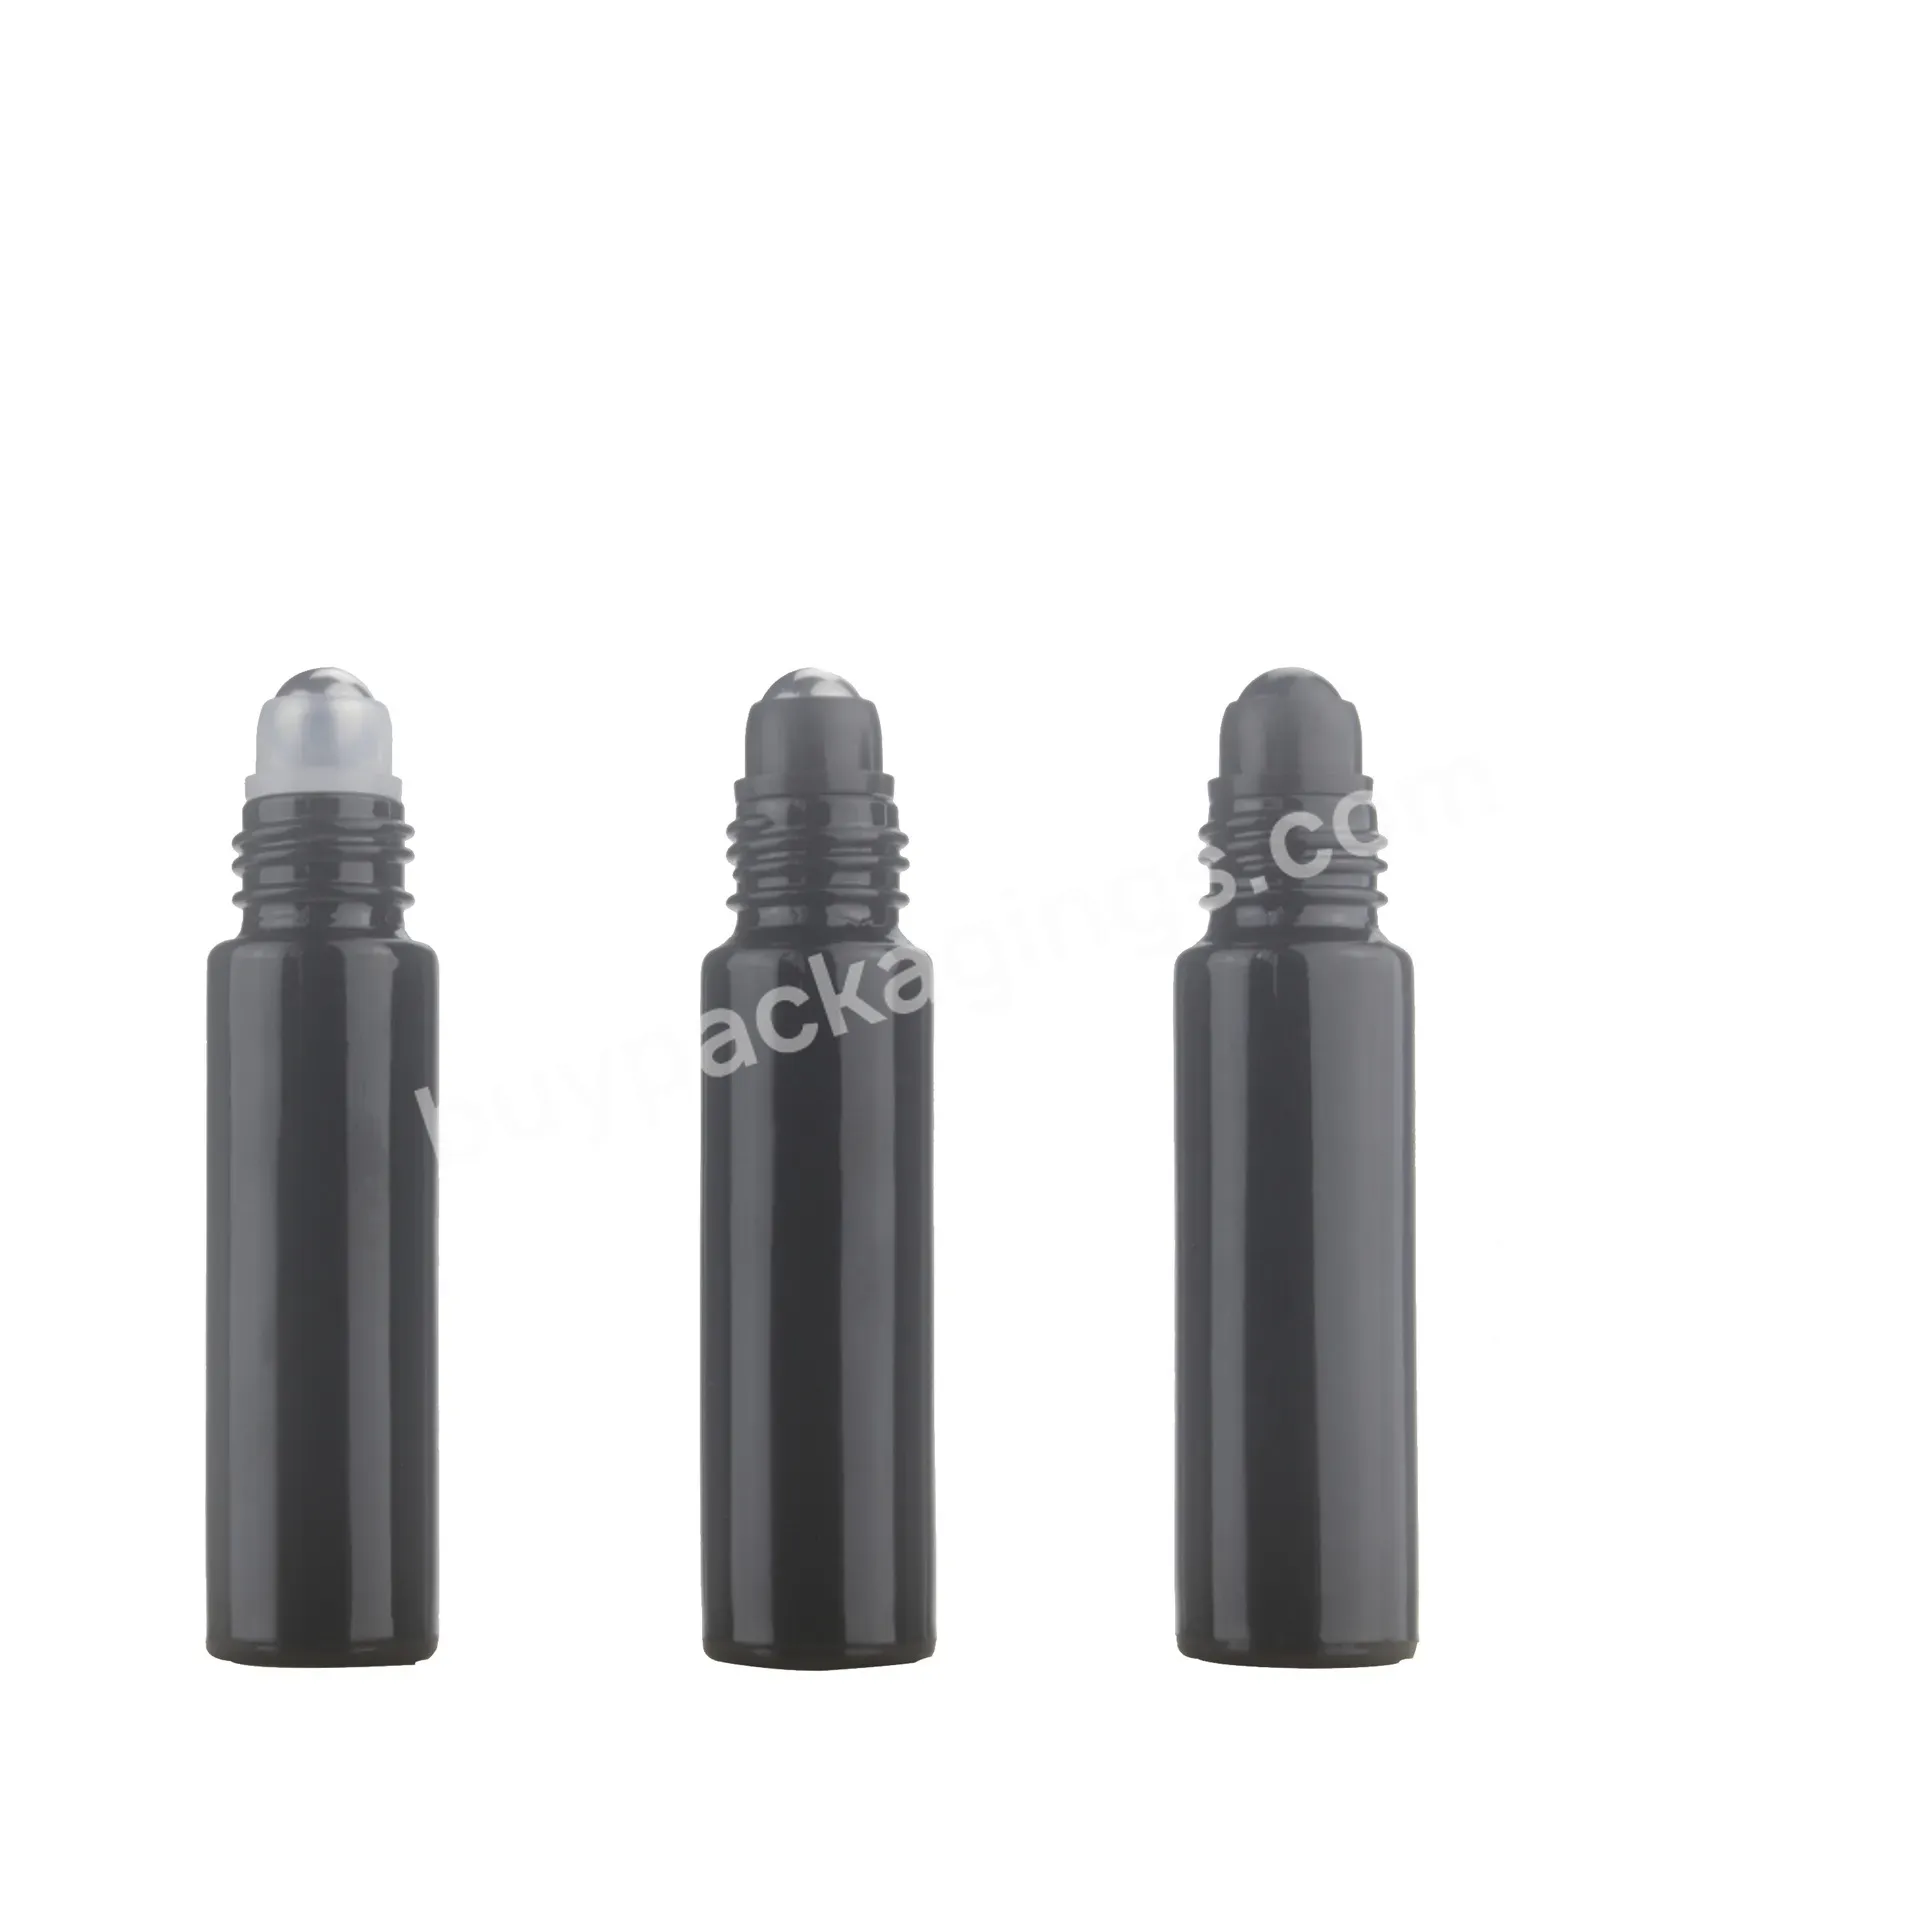 10 Ml Black Glossy Glass Roll-on Bottles With Stainless Steel Roller Balls For Essential Oils Colognes & Perfumes